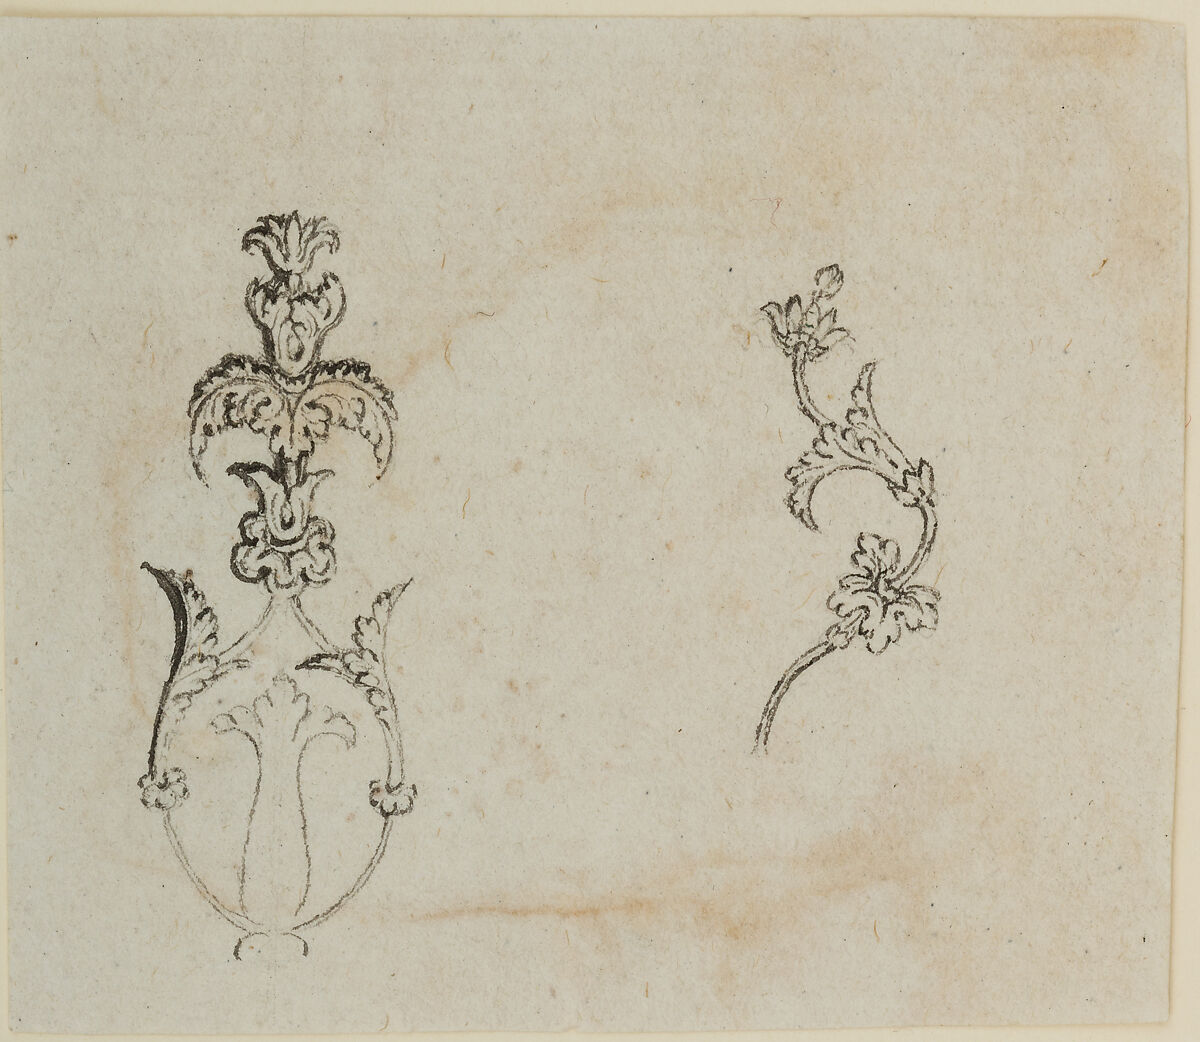 Two Designs for the Decoration of Firearms, Workshop of Nicolas Noël Boutet (French, Versailles and Paris, 1761–1833), Pencil, ink, gray wash on paper, French, Versailles 